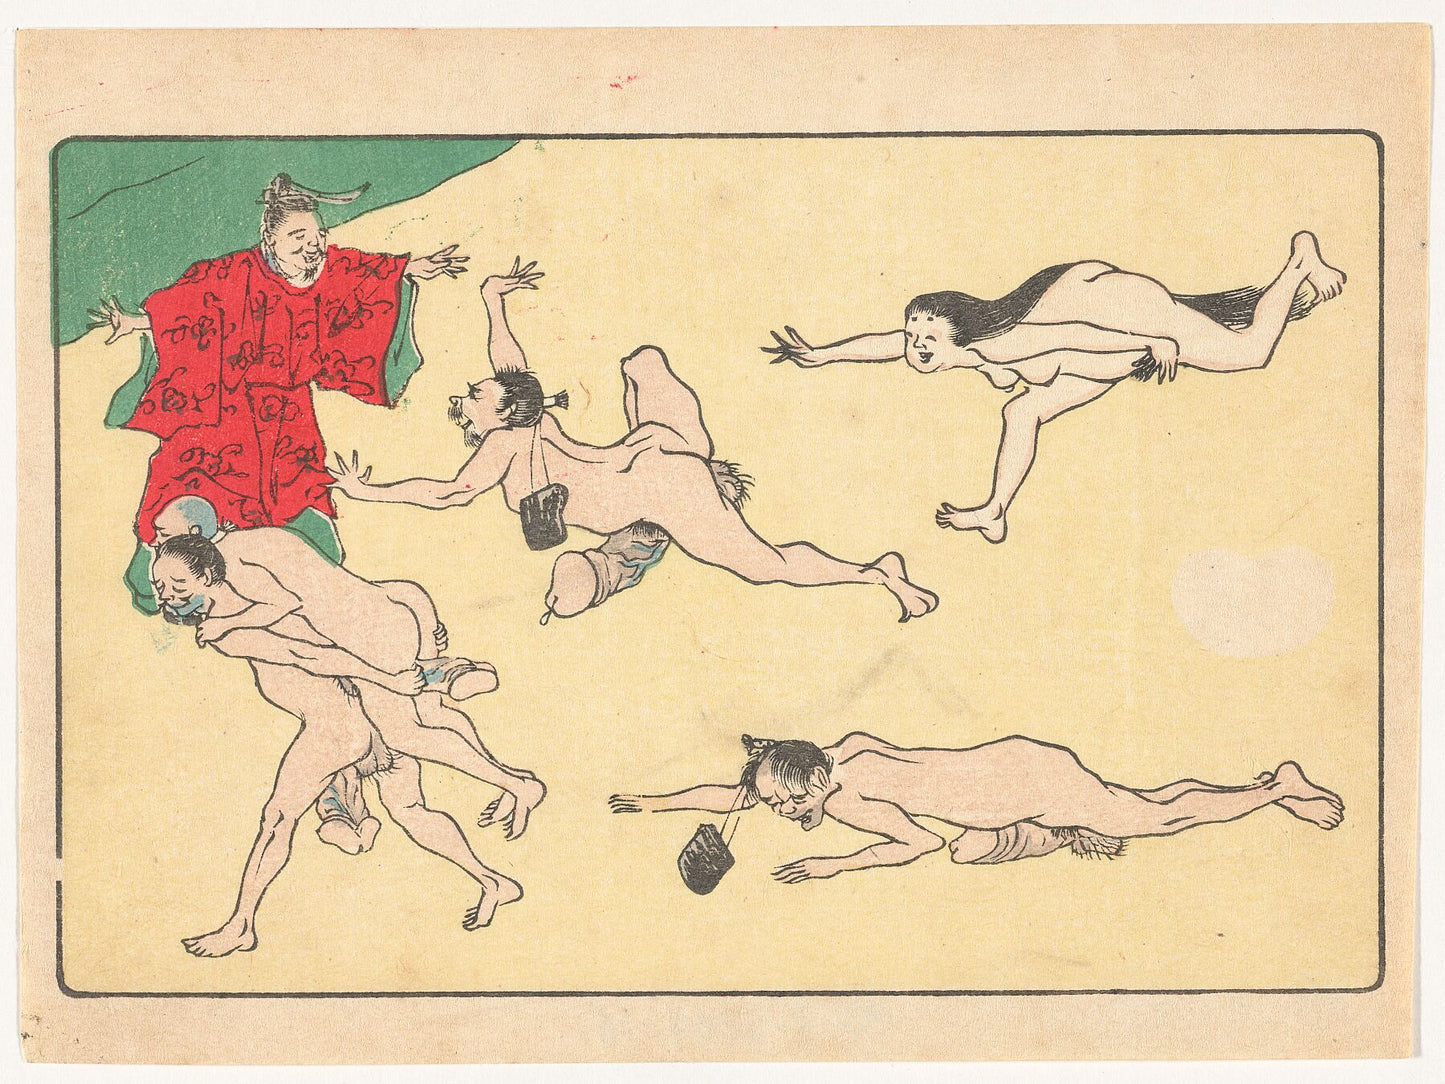 Courtier and naked people by Kawanabe Kyôsai, c. 1870 - c. 1880